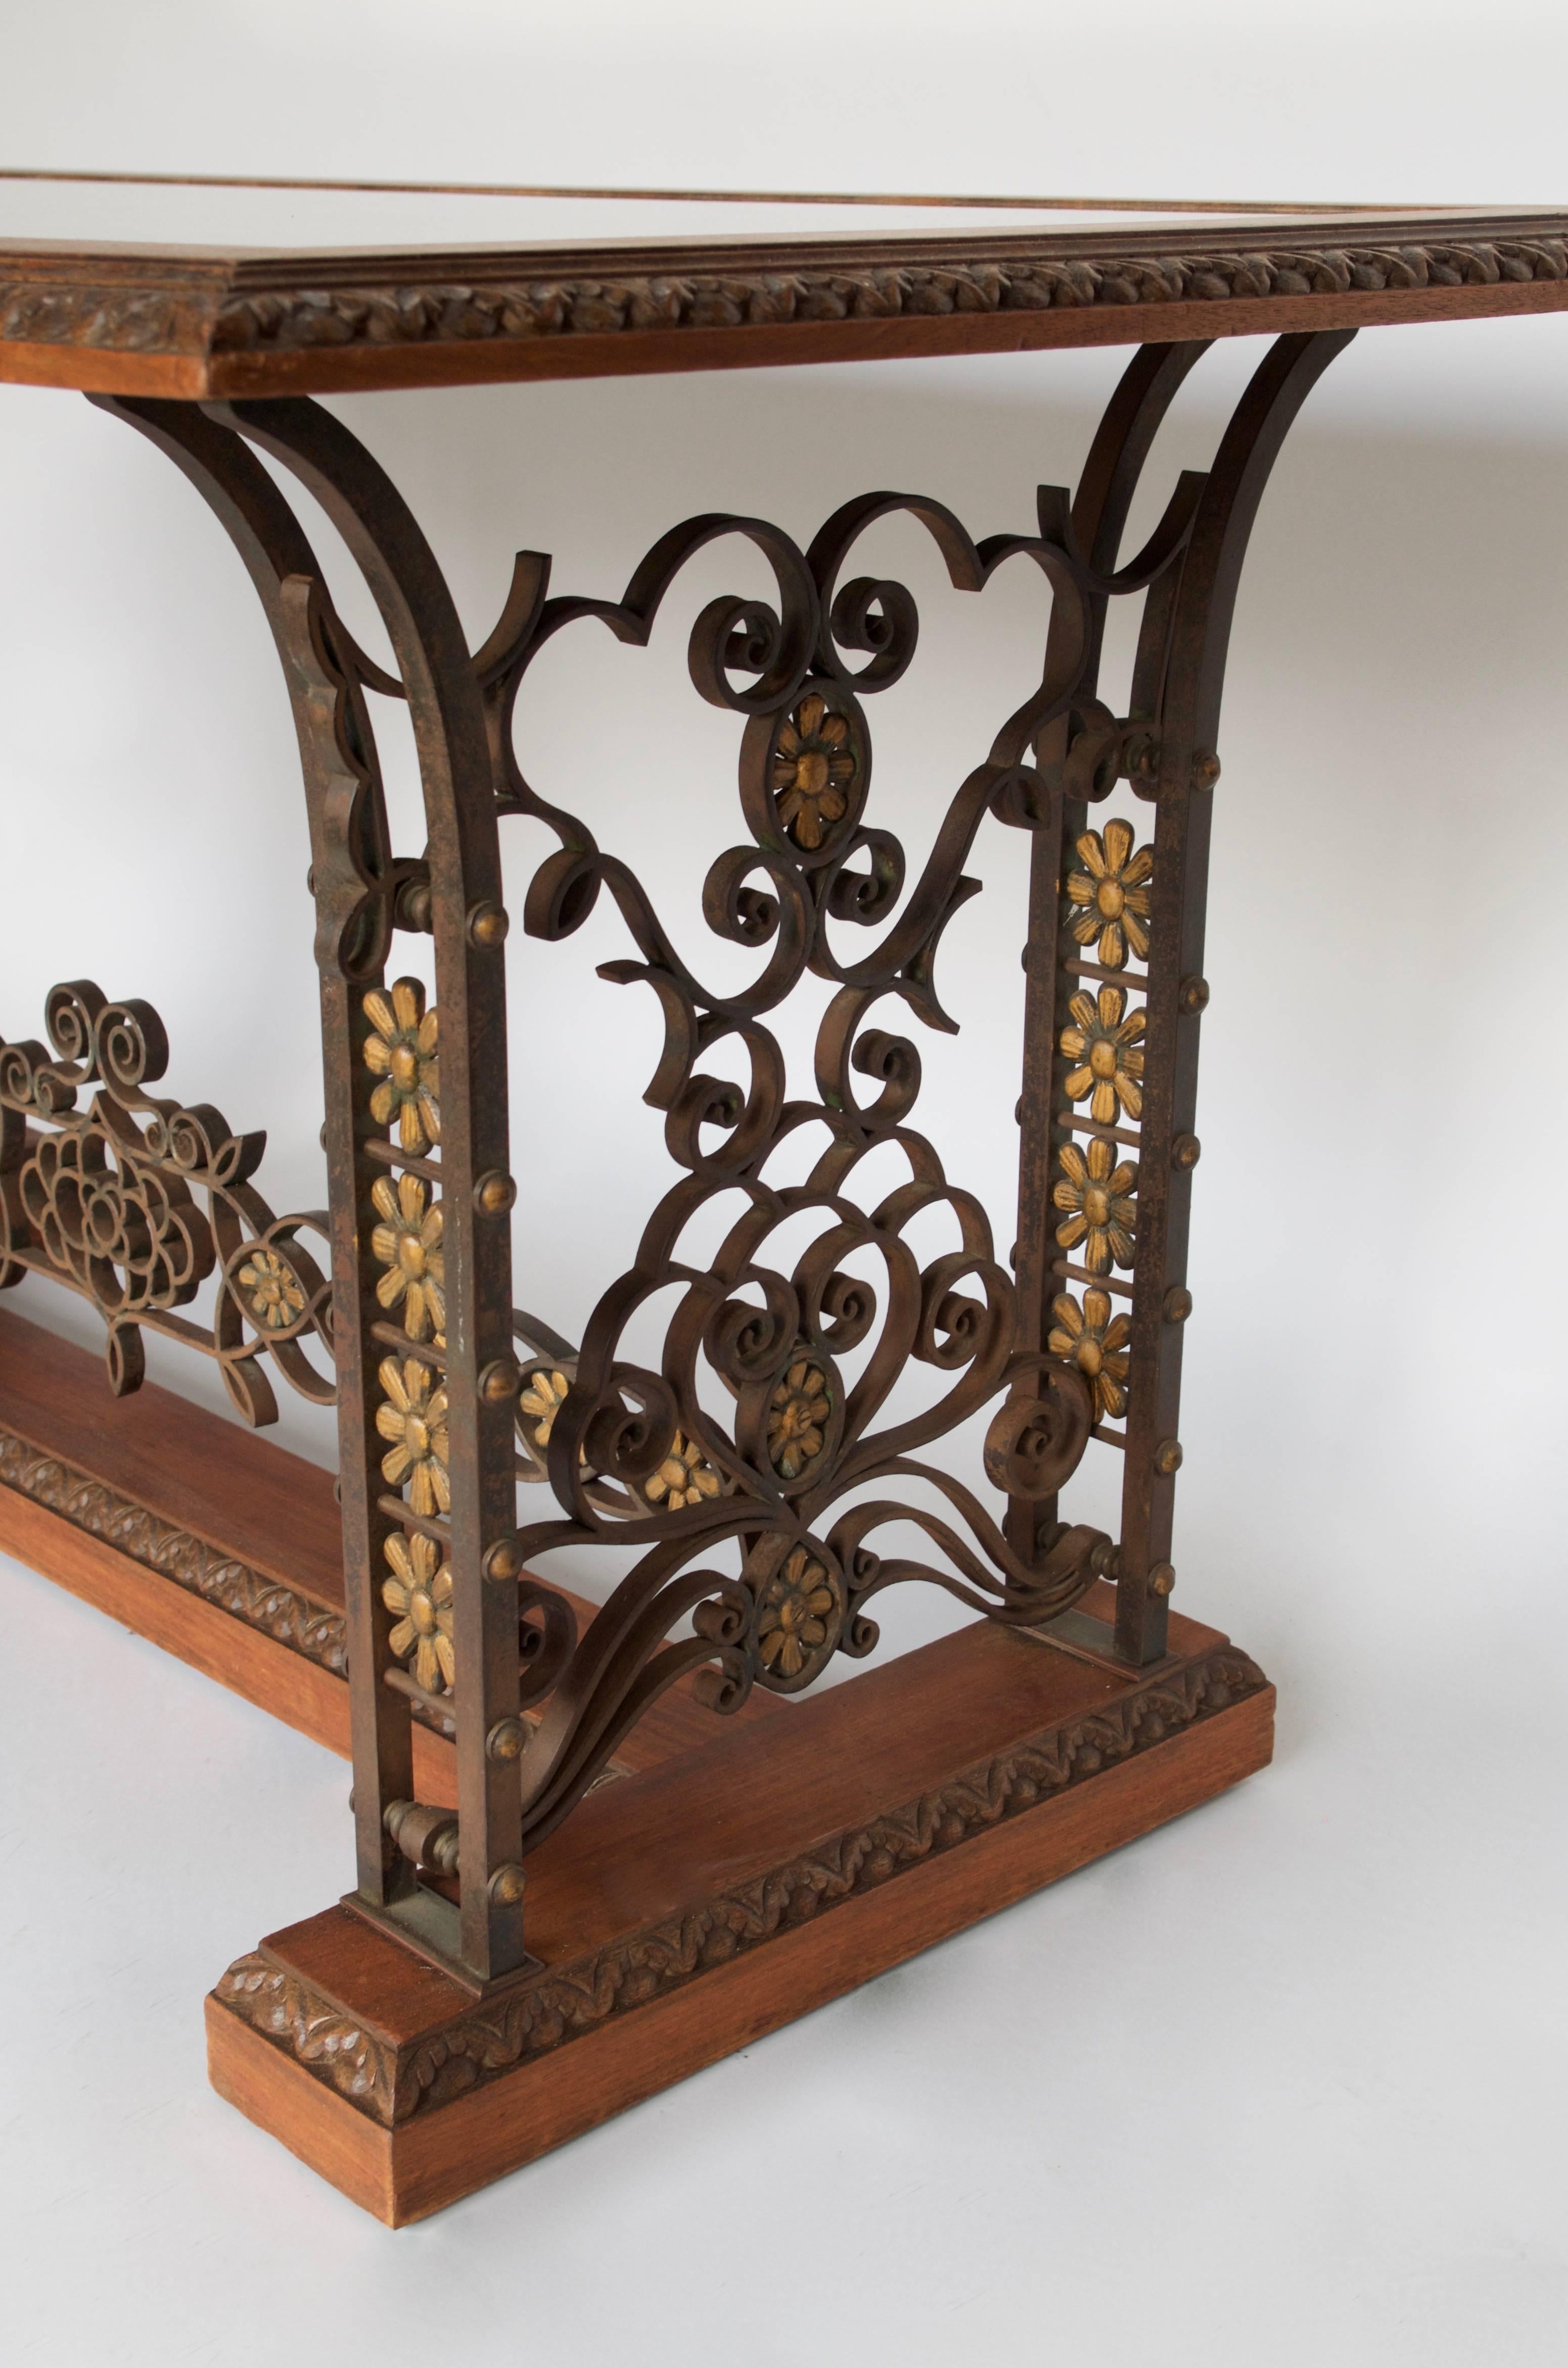 Finely worked wrought iron feet
Decoration of interlacing and gilt flowers
Molded and carved mahogany
Oxidized mirror top
Work of the 1950s.

 